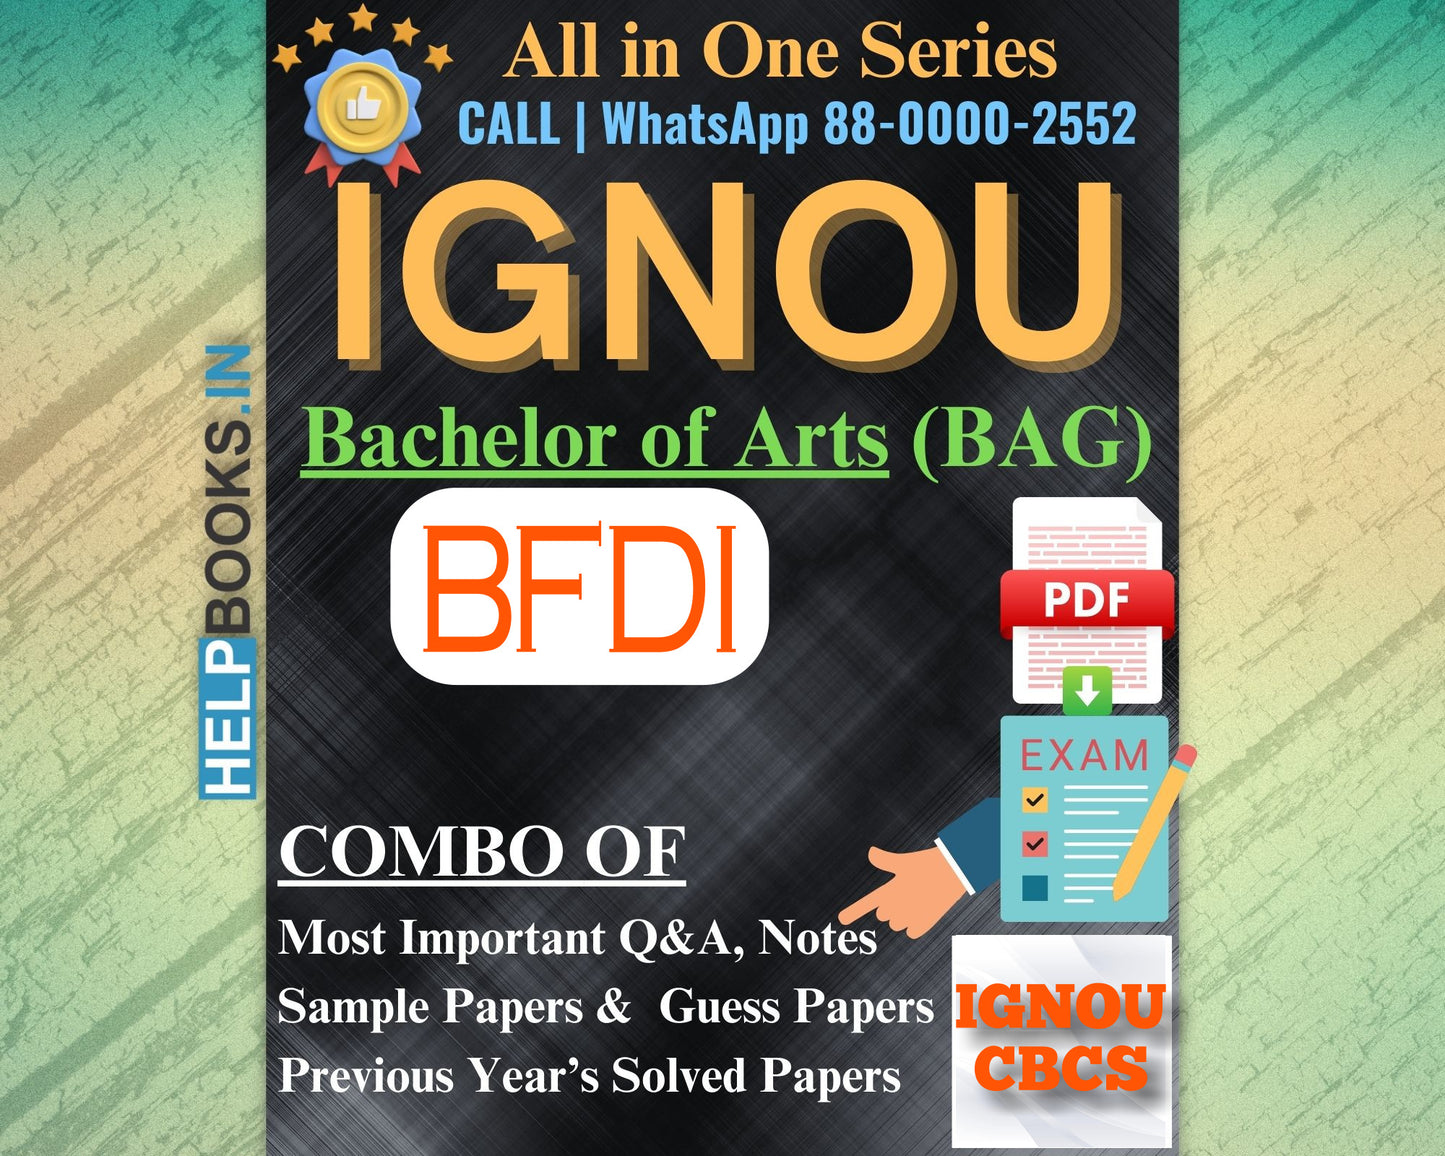 IGNOU BAG Online Study Package: Bachelor of Arts (BA) - Previous Year’s Solved Papers, Q&A, Exam Notes, Sample Papers, Guess Papers-BFDI073